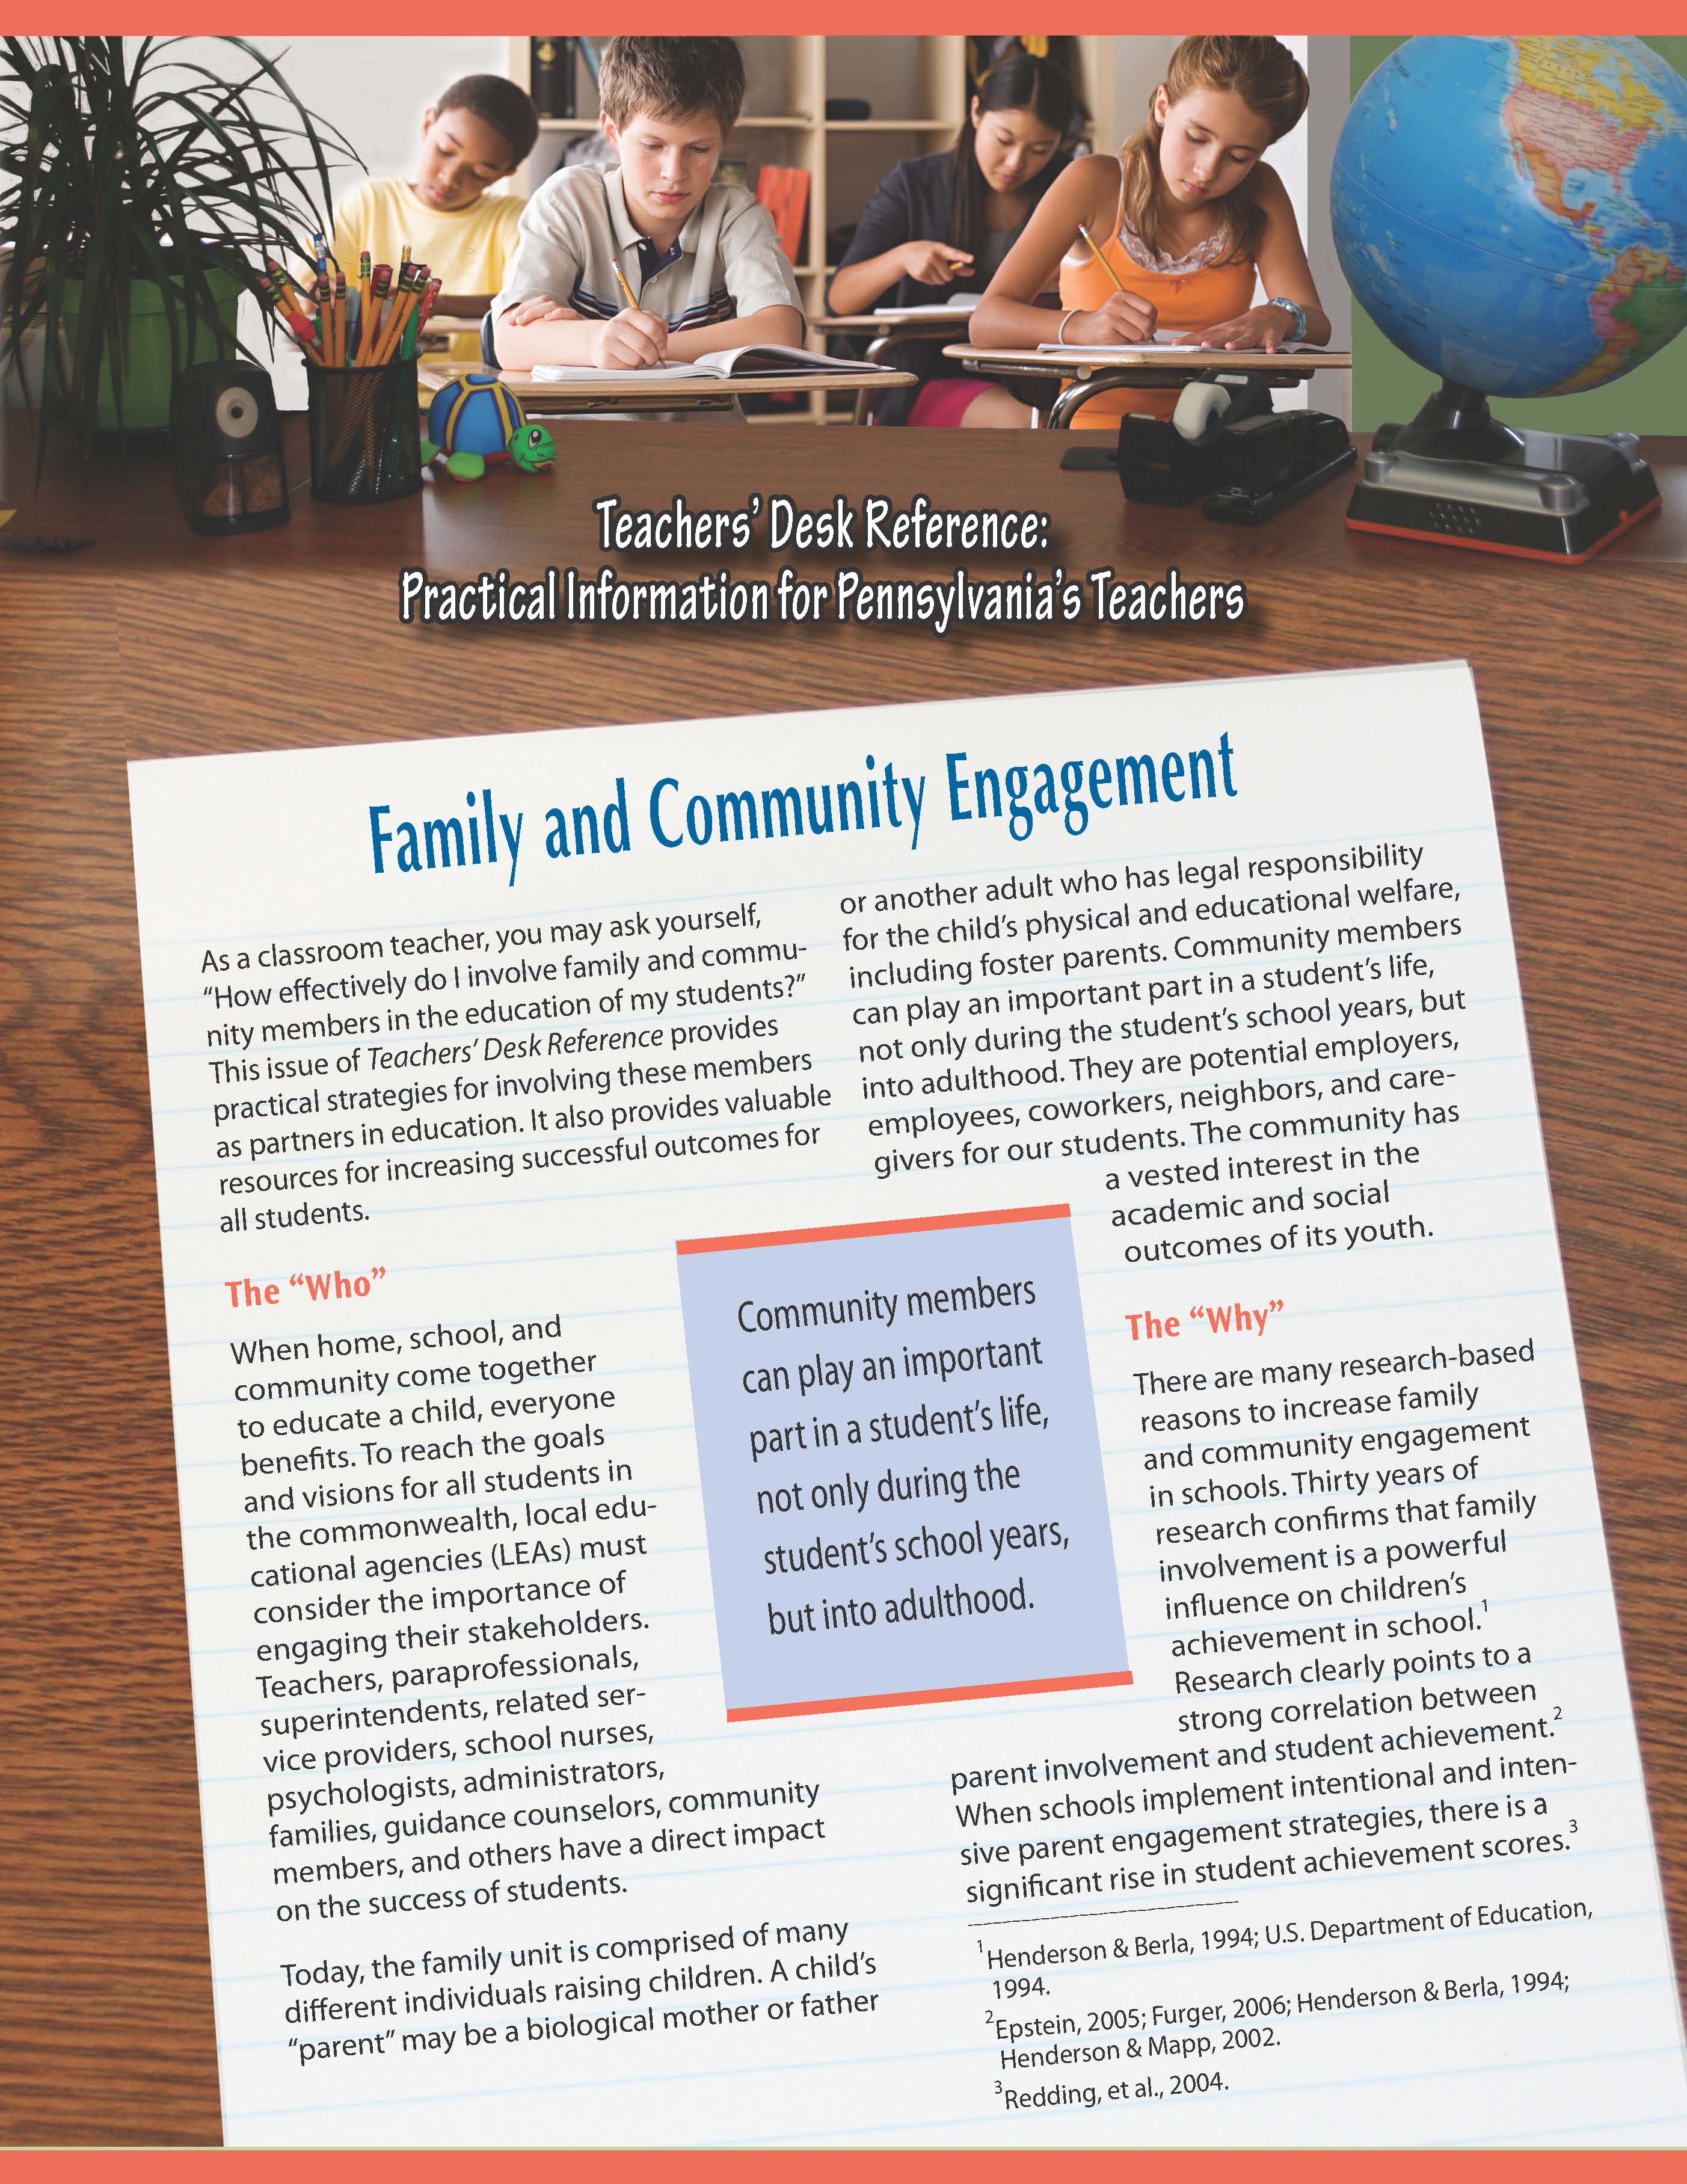 Teachers' Desk Reference: Family and Community Engagement